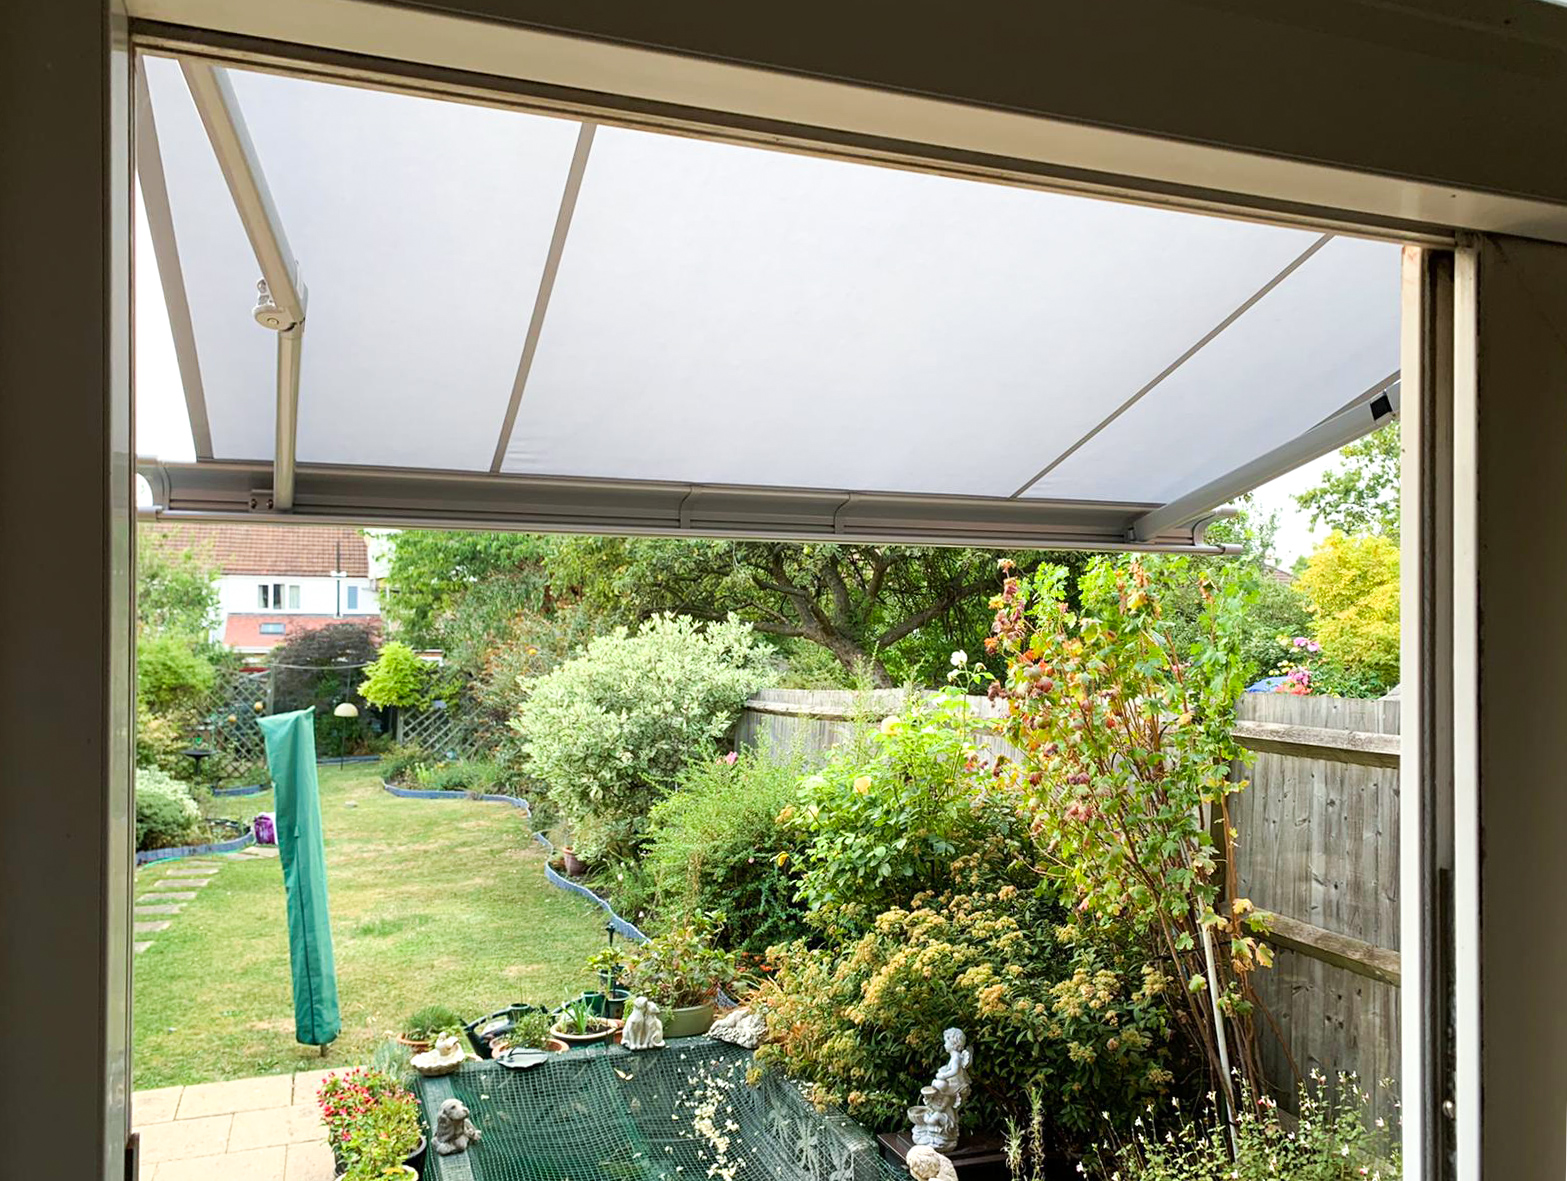 Markilux 990 Awning Installed by our New Malden Branch.